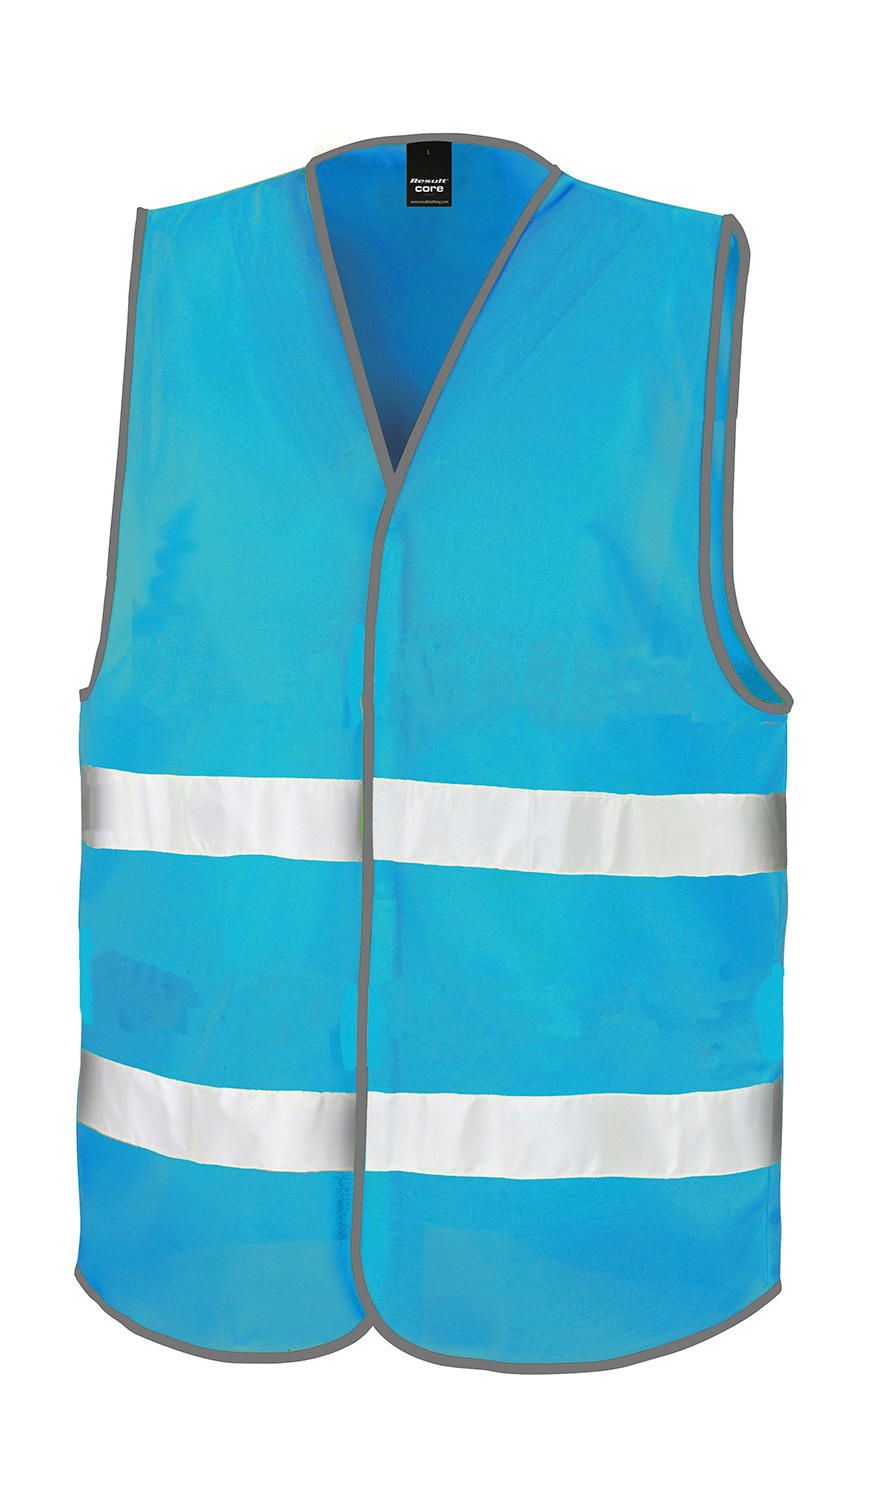  Core Enhanced Visibility Vest in Farbe Sky Blue